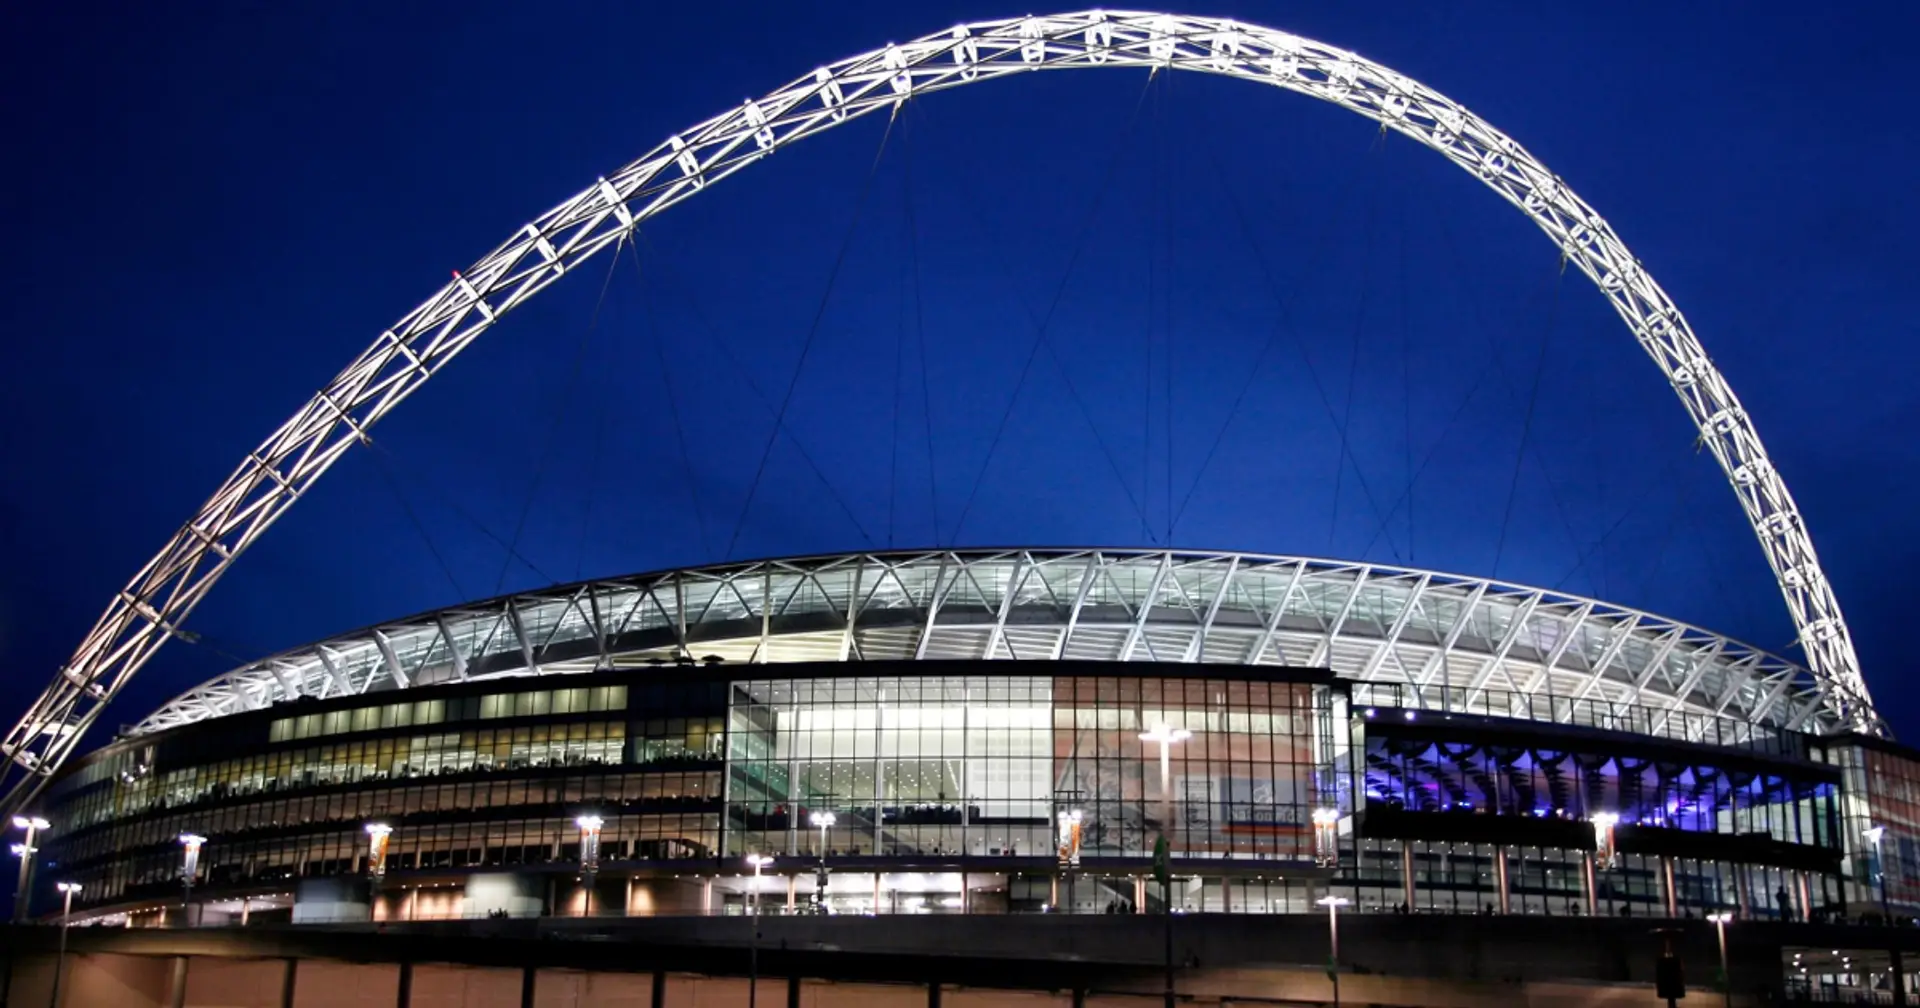 'It says Jews don’t count': FA criticised over not lightning up Wembley arch in support of Israel